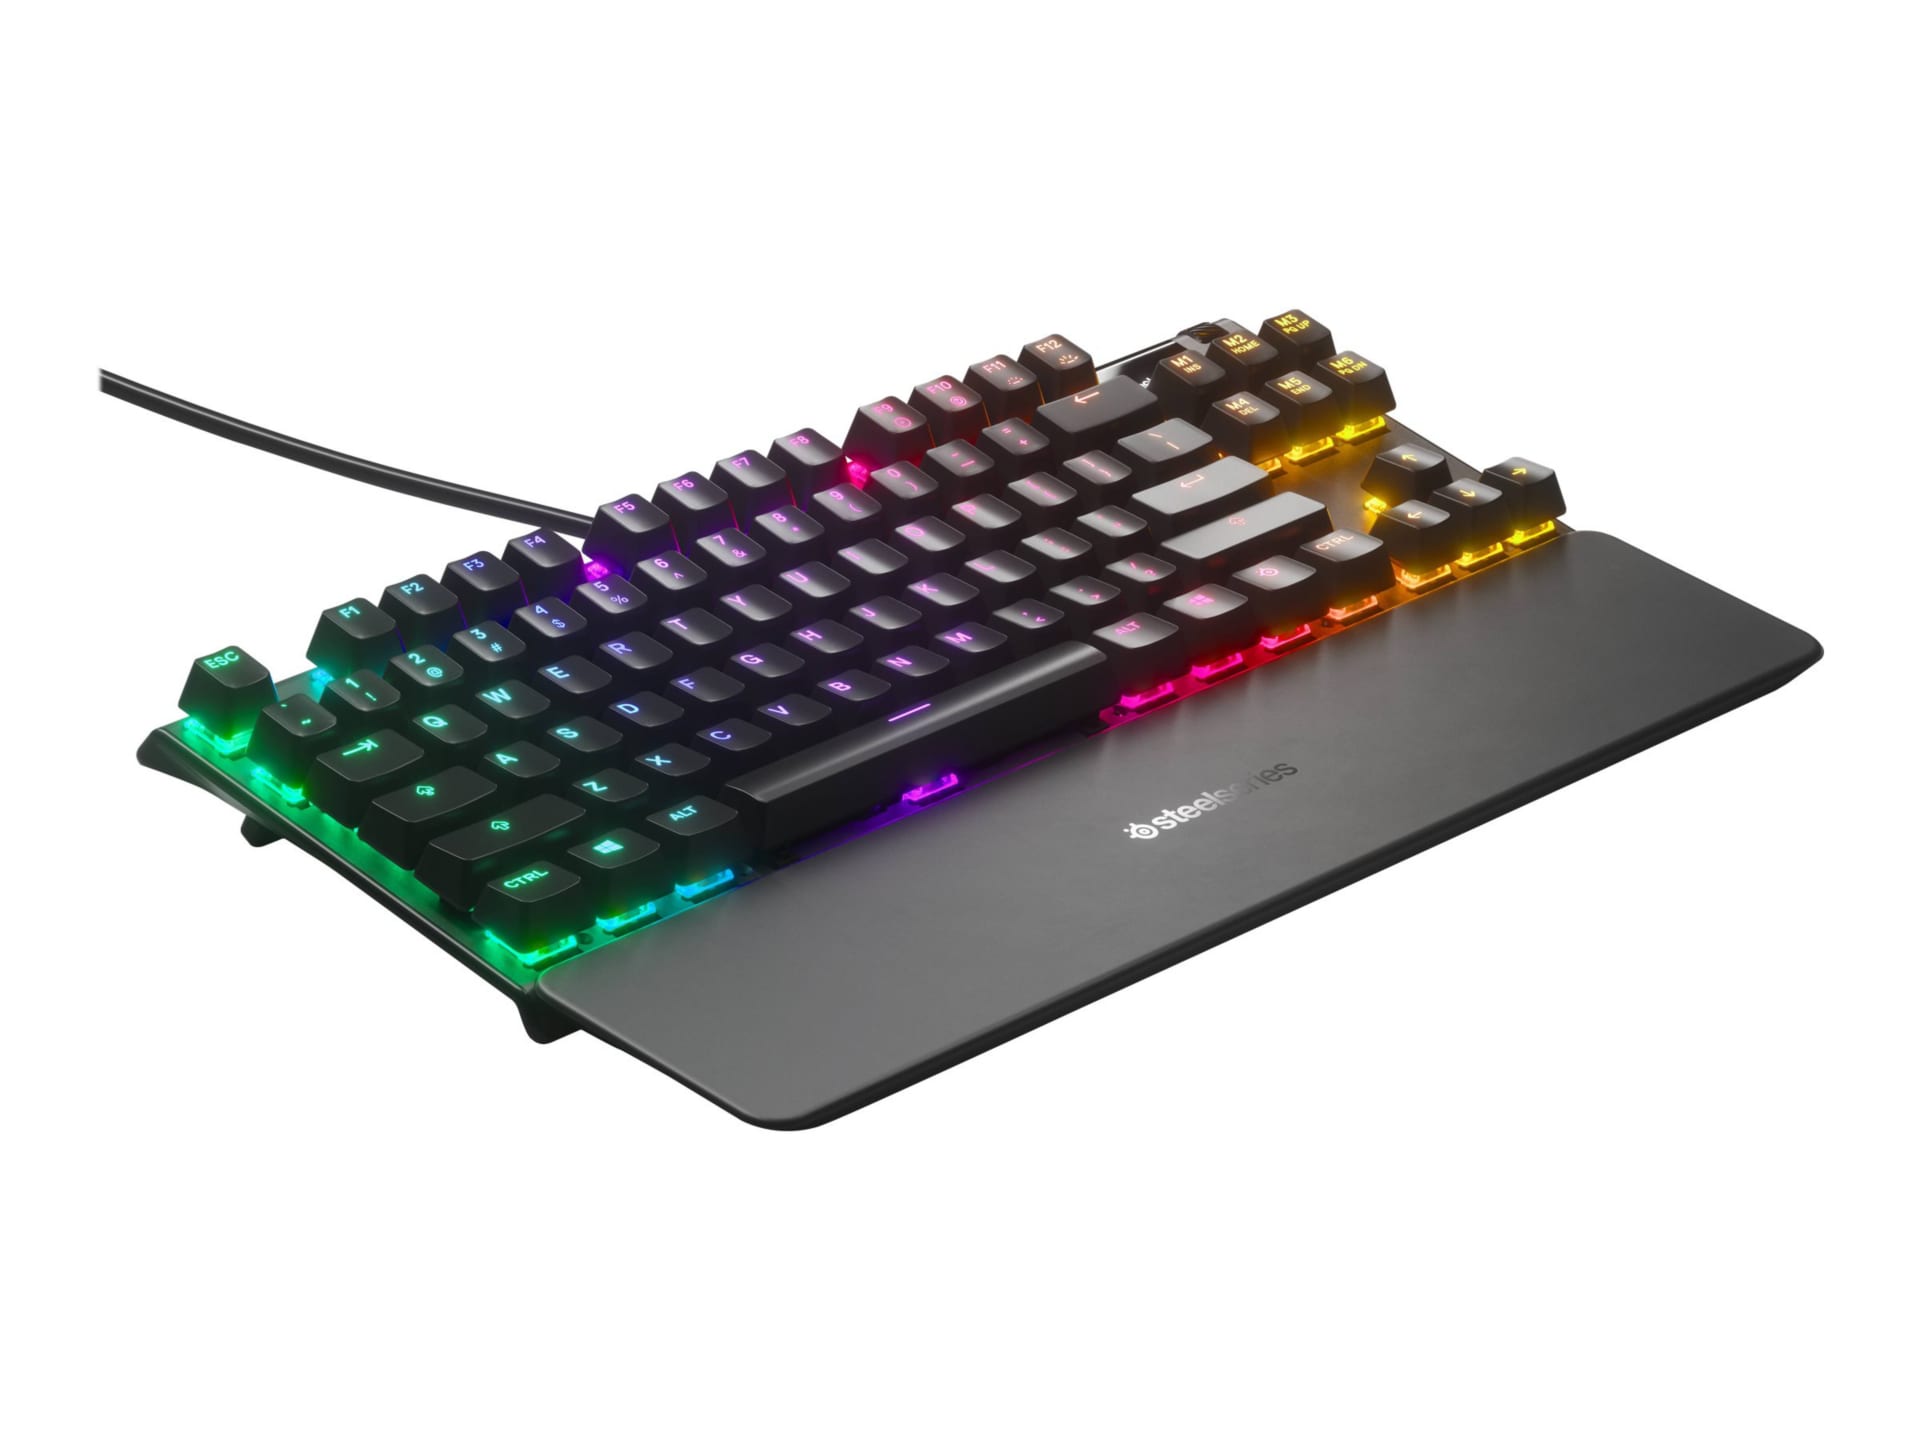 SteelSeries Apex Pro TKL - keyboard - with display - QWERTY - US English Input Device